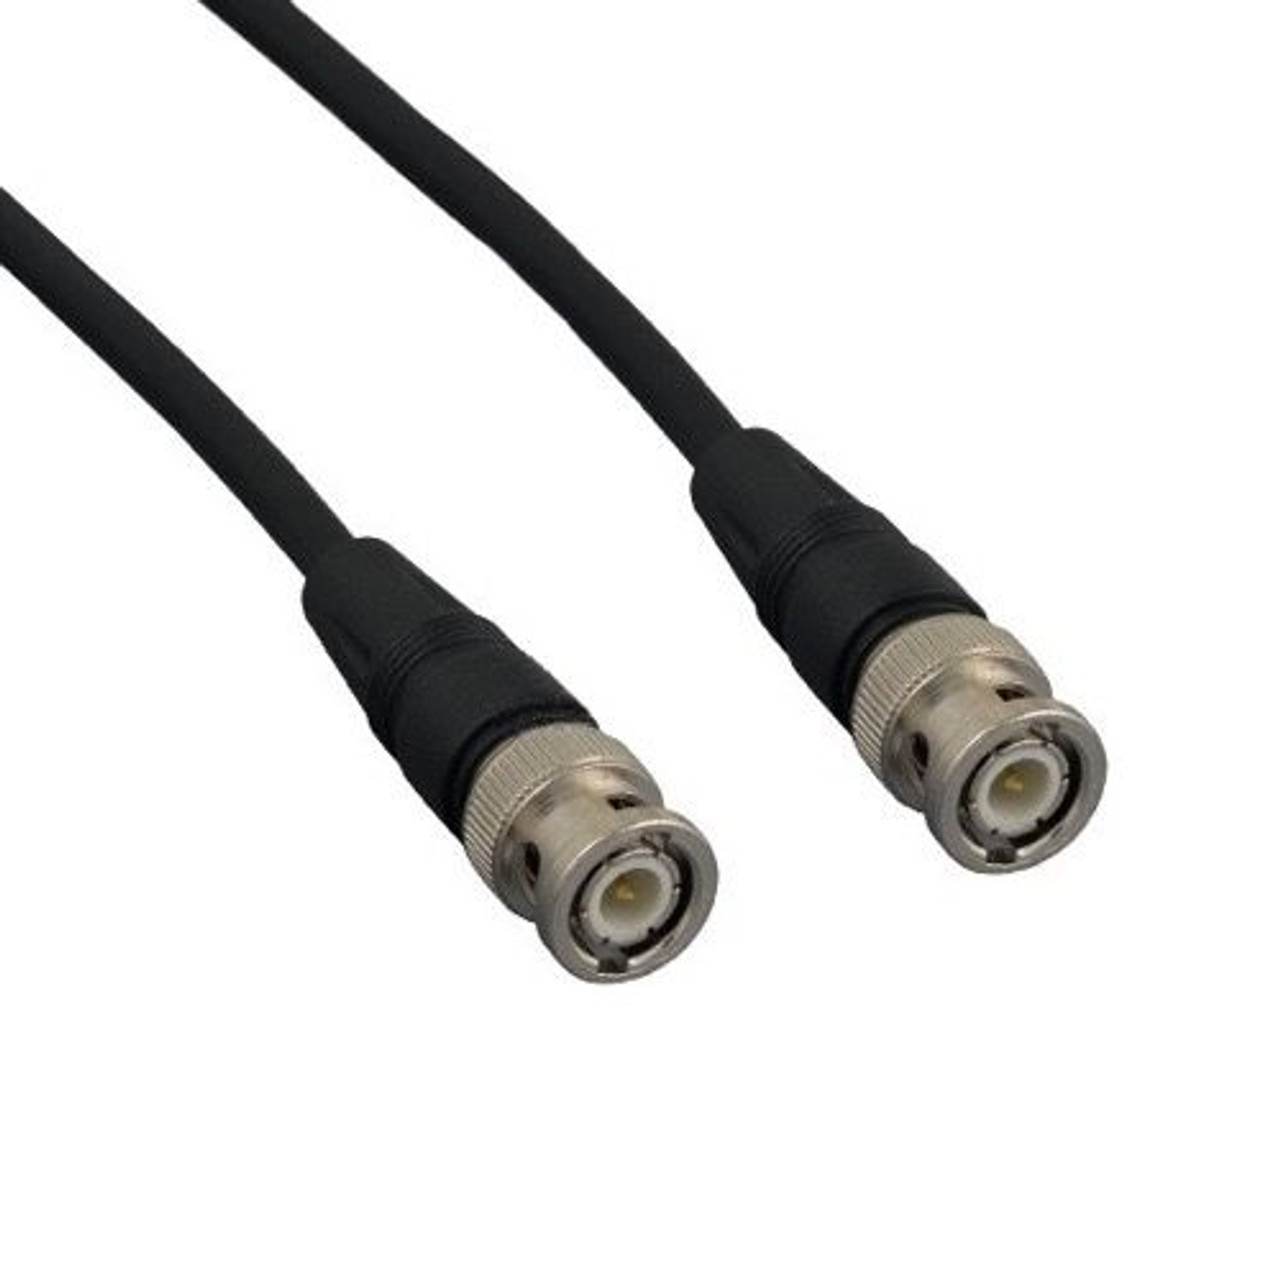 Steren 205-547 50' FT RG59 Coaxial Cable BNC Connector Each End 15 Meter Male to Male Black RG-59 Coaxial Cable with Factory Installed BNC Connectors for Improved Audio Video Connections, Part # 205547